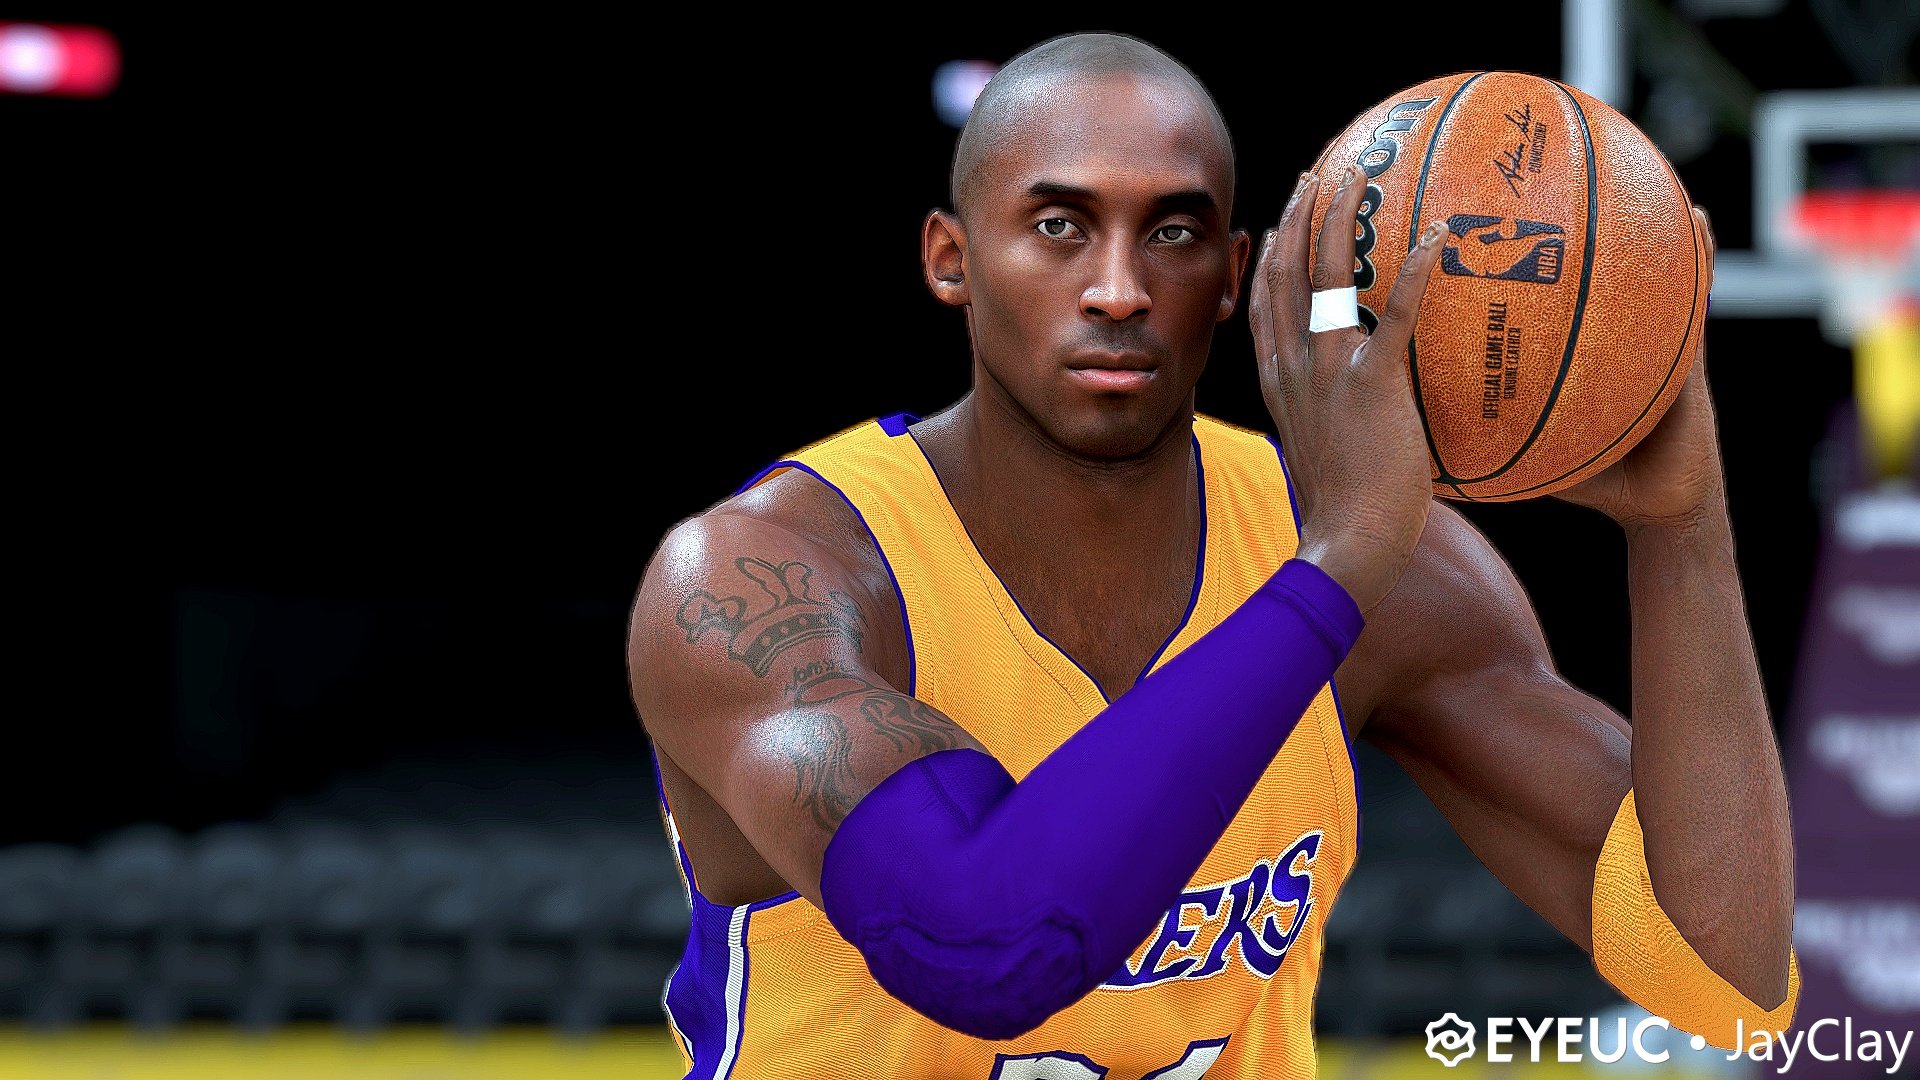 NBA 2K Modding Society on X: #NBA2K21 Remastered by @Mochna2K  @mahmood_studios & more is one of the most game-changing mods of  all-time. The full mod and hotfix can be found here: v1.0